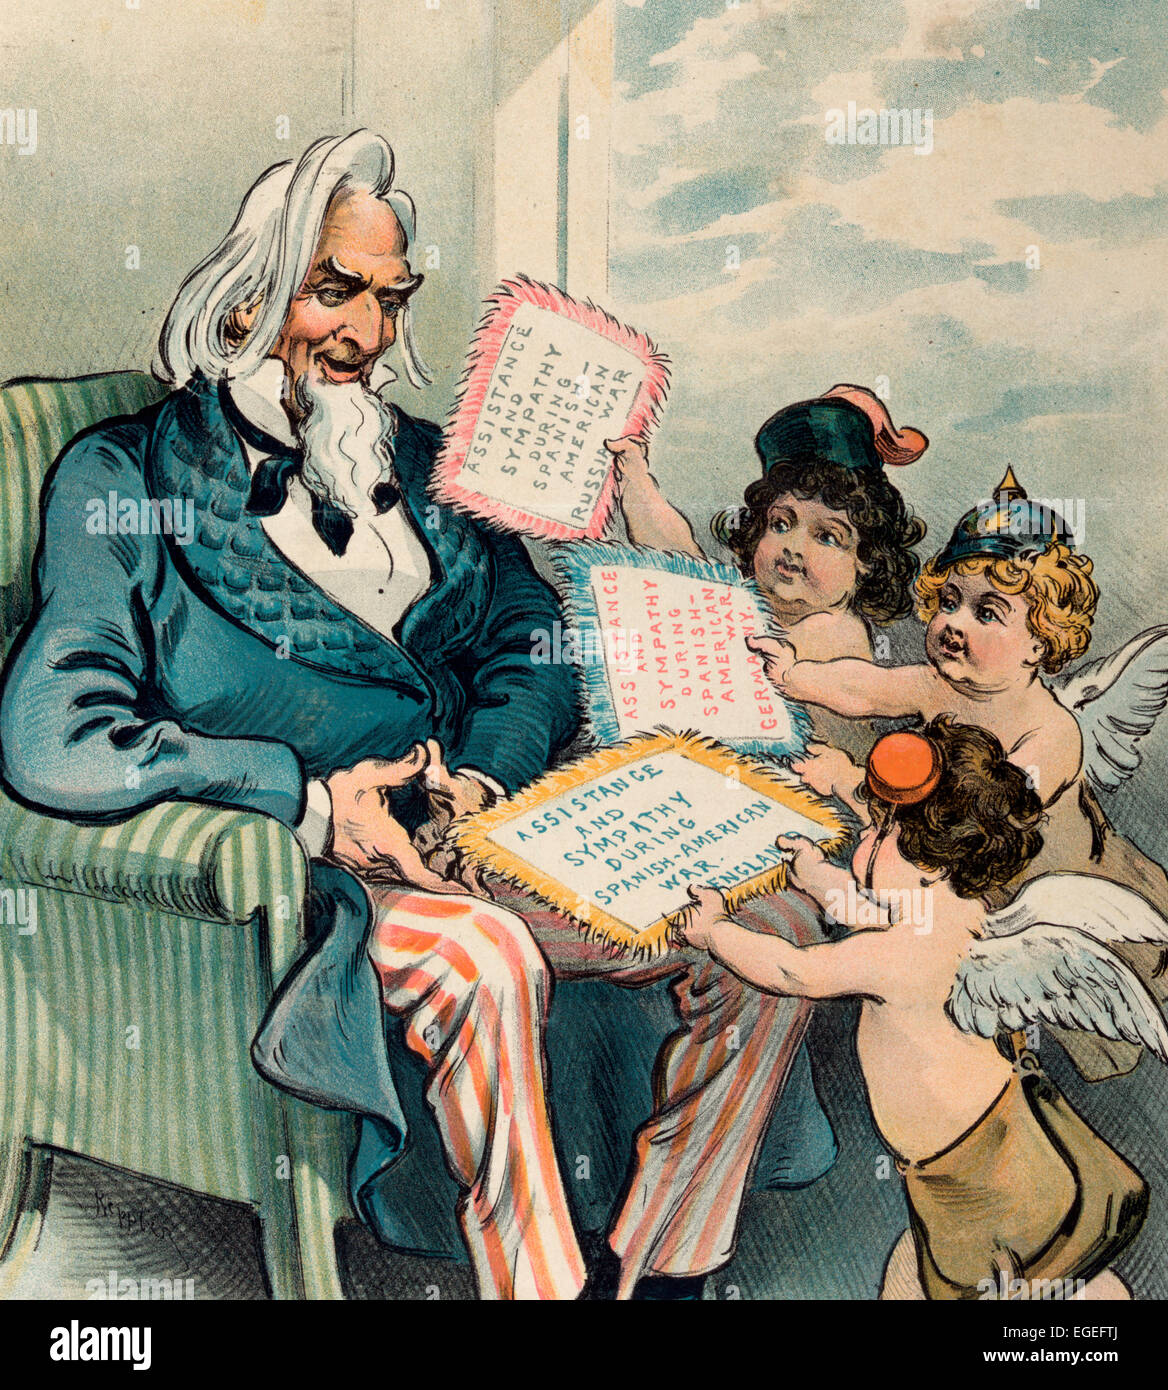 Uncle Sam's Valentines - 'I didn't know I had so many friend till I won that fight'.  Uncle Sam sitting in a chair with three putti handing him valentine cards that state 'Assistance and Sympathy during the Spanish-American War'; the cards have come from 'England', 'Germany', and 'Russia'. Political cartoon, 1902 Stock Photo